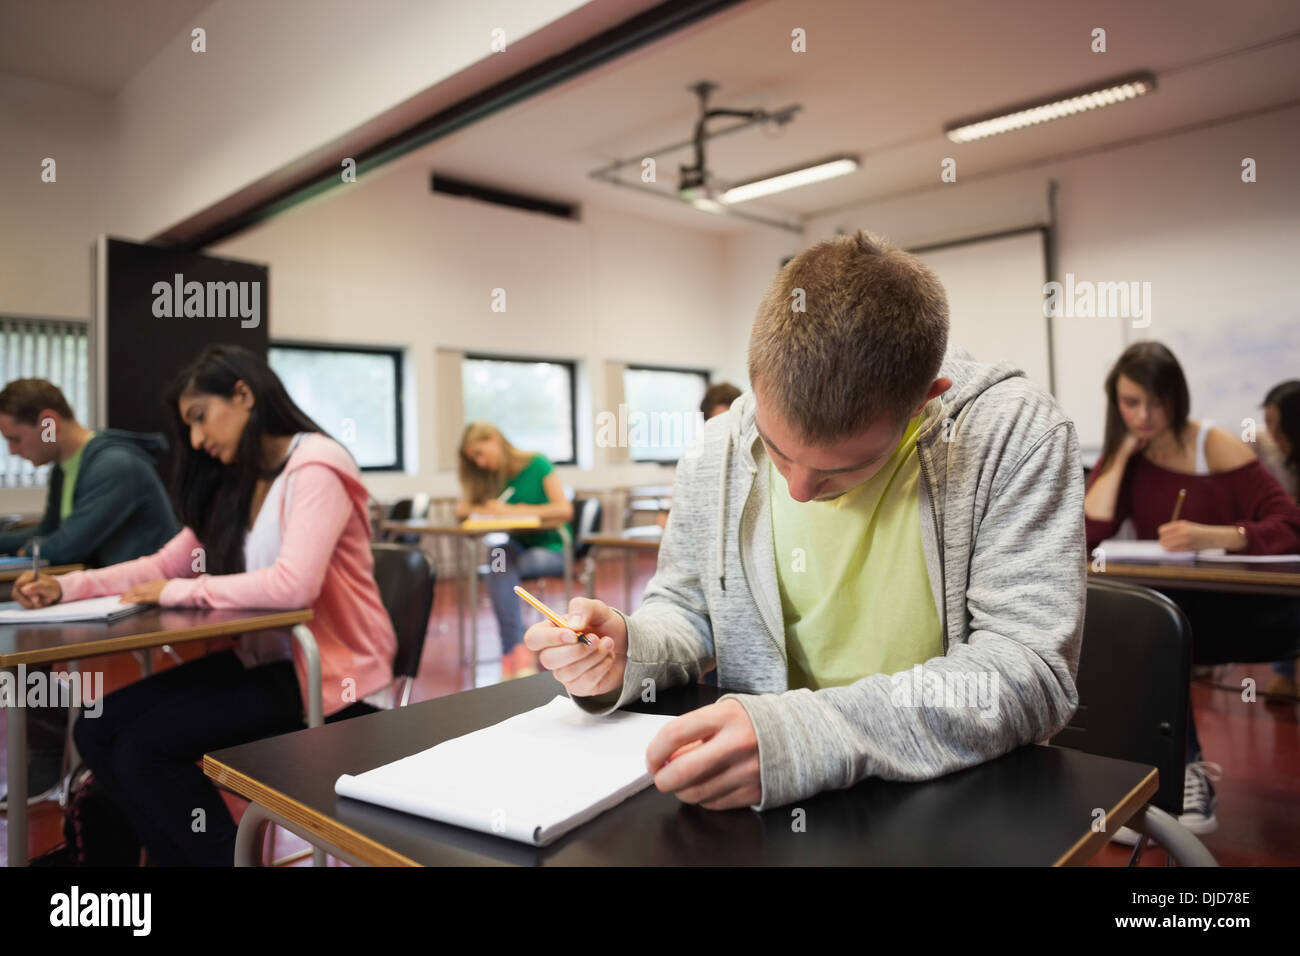 Focused students taking a test in class Stock Photo